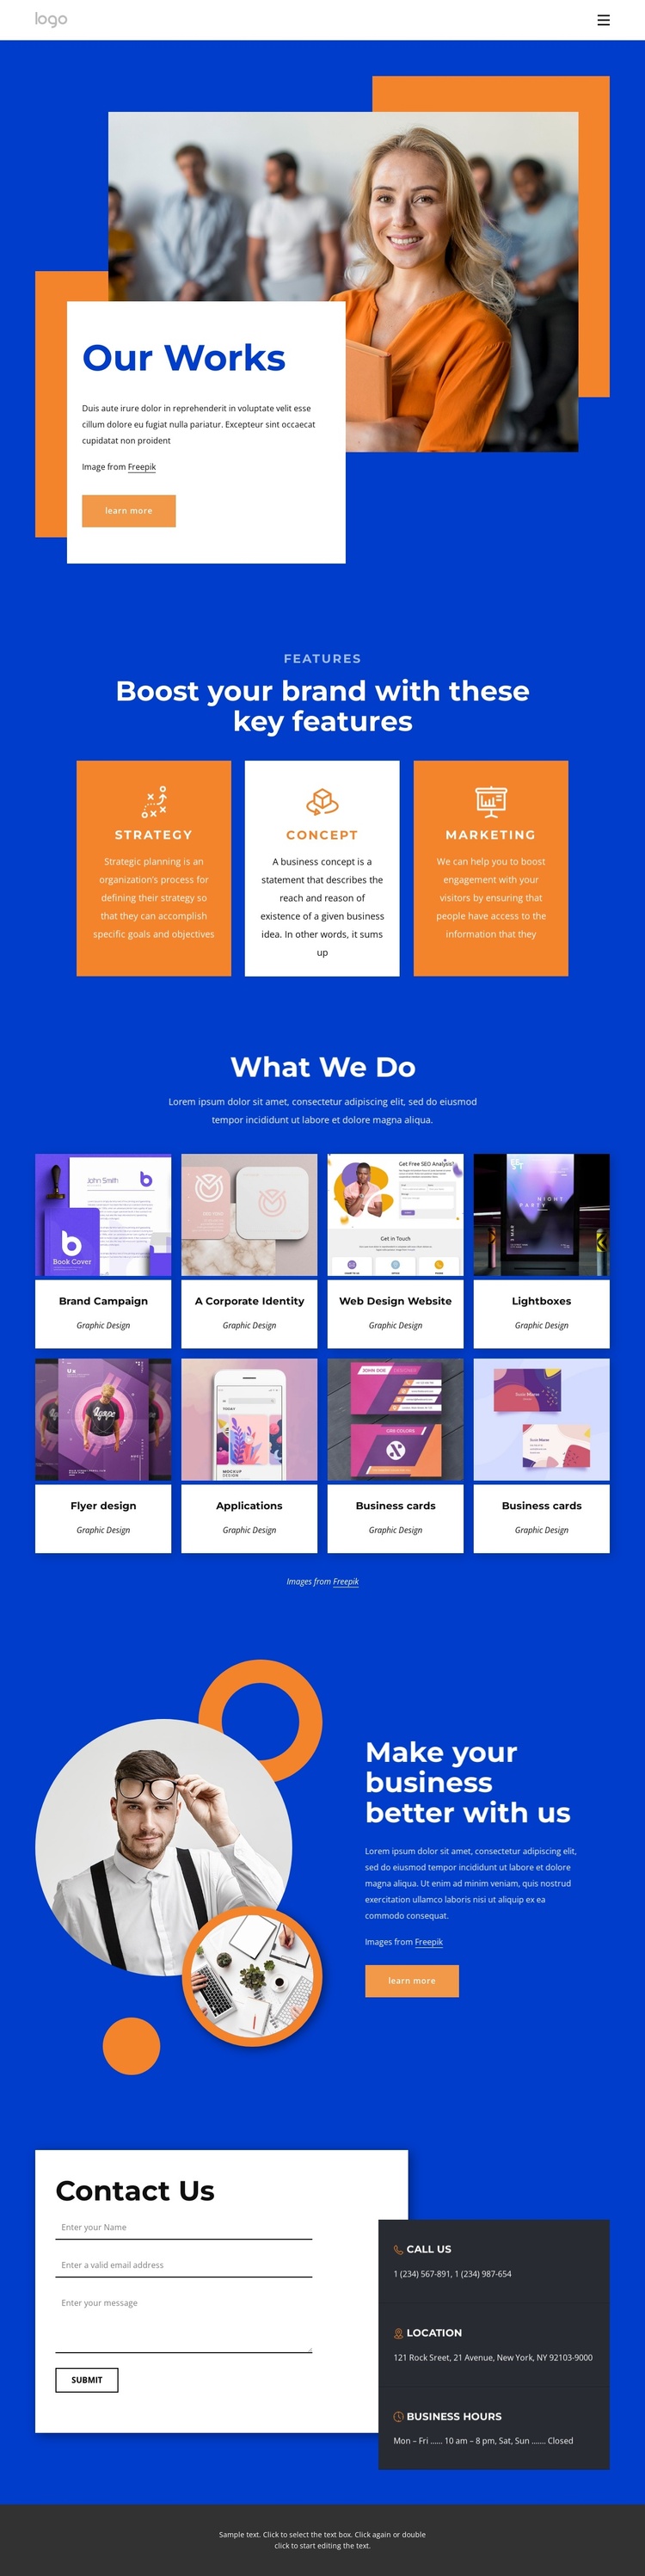 Web design for your small business Joomla Template